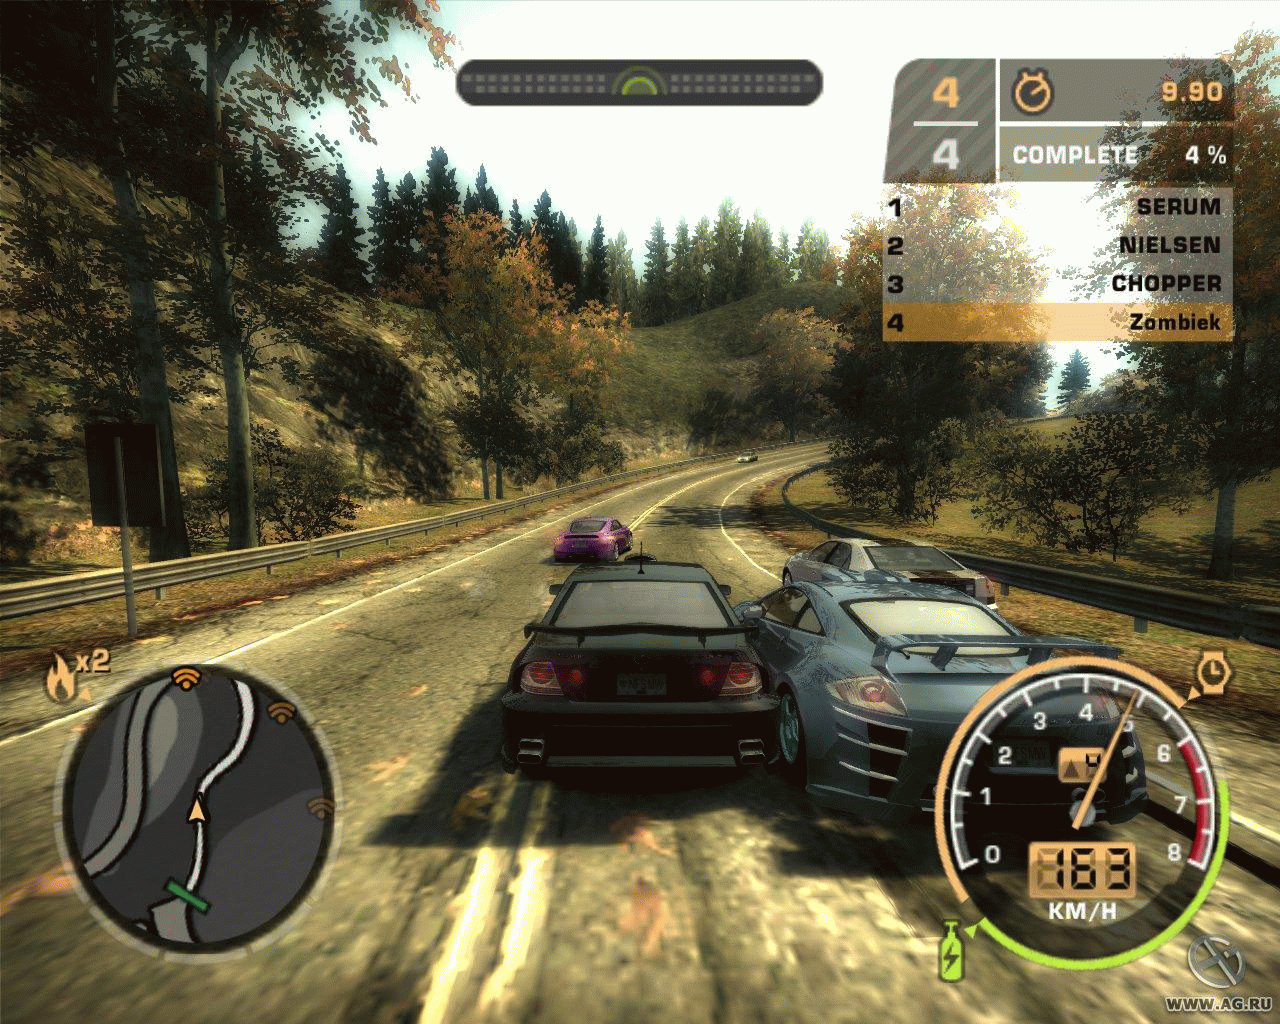 Игры 2005 от механики. Игра NFS most wanted 2005. Гонки NFS most wanted Black Edition. NFS most wanted 2005 русская версия. NFS most wanted 2005 Black Edition.